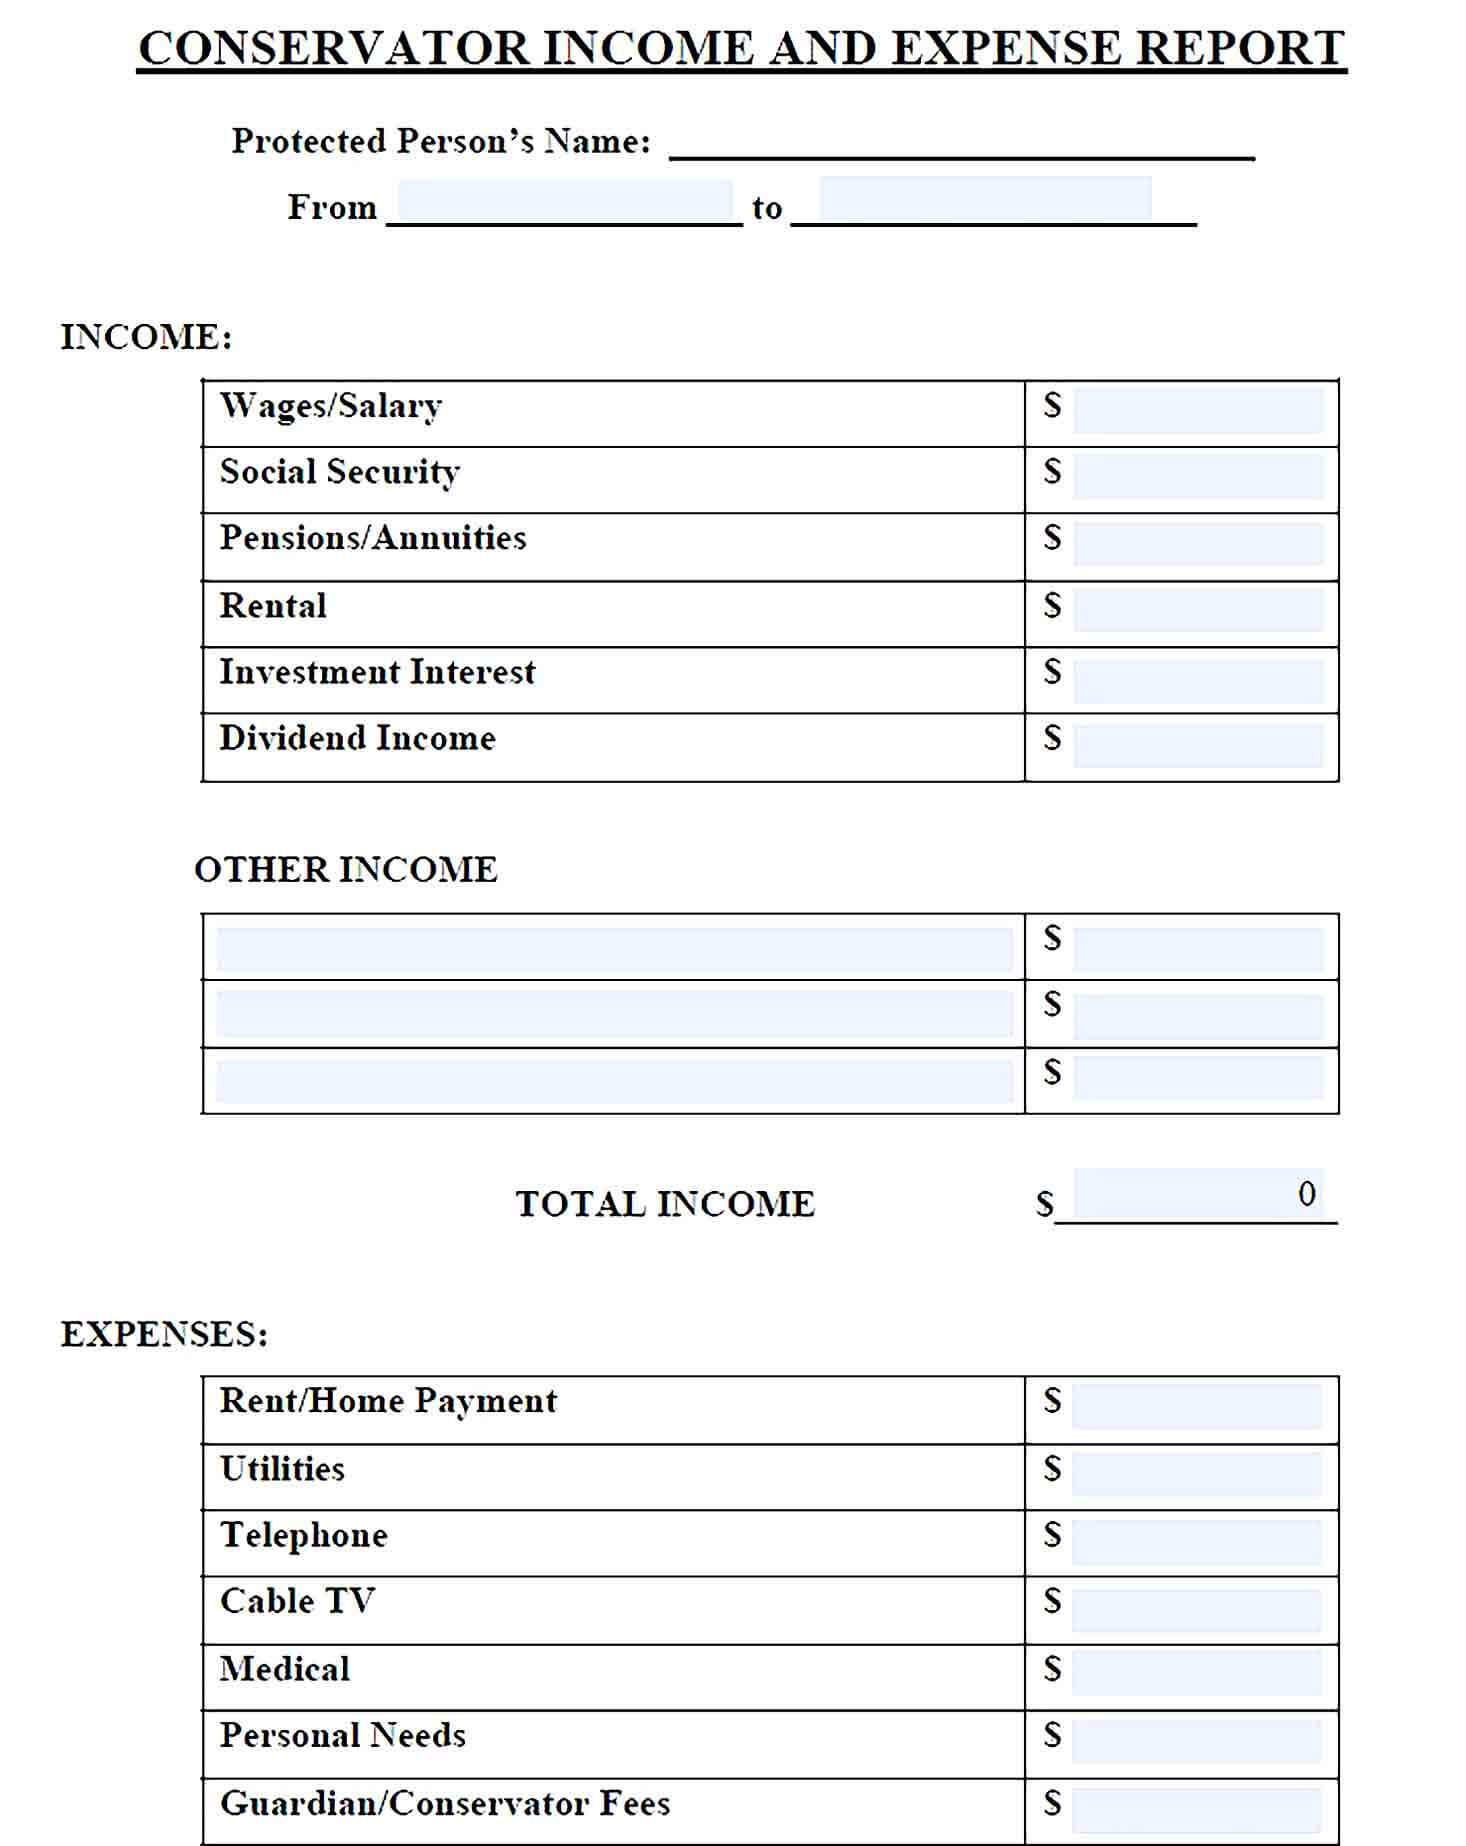 Sample Conservator Income And Expense Report